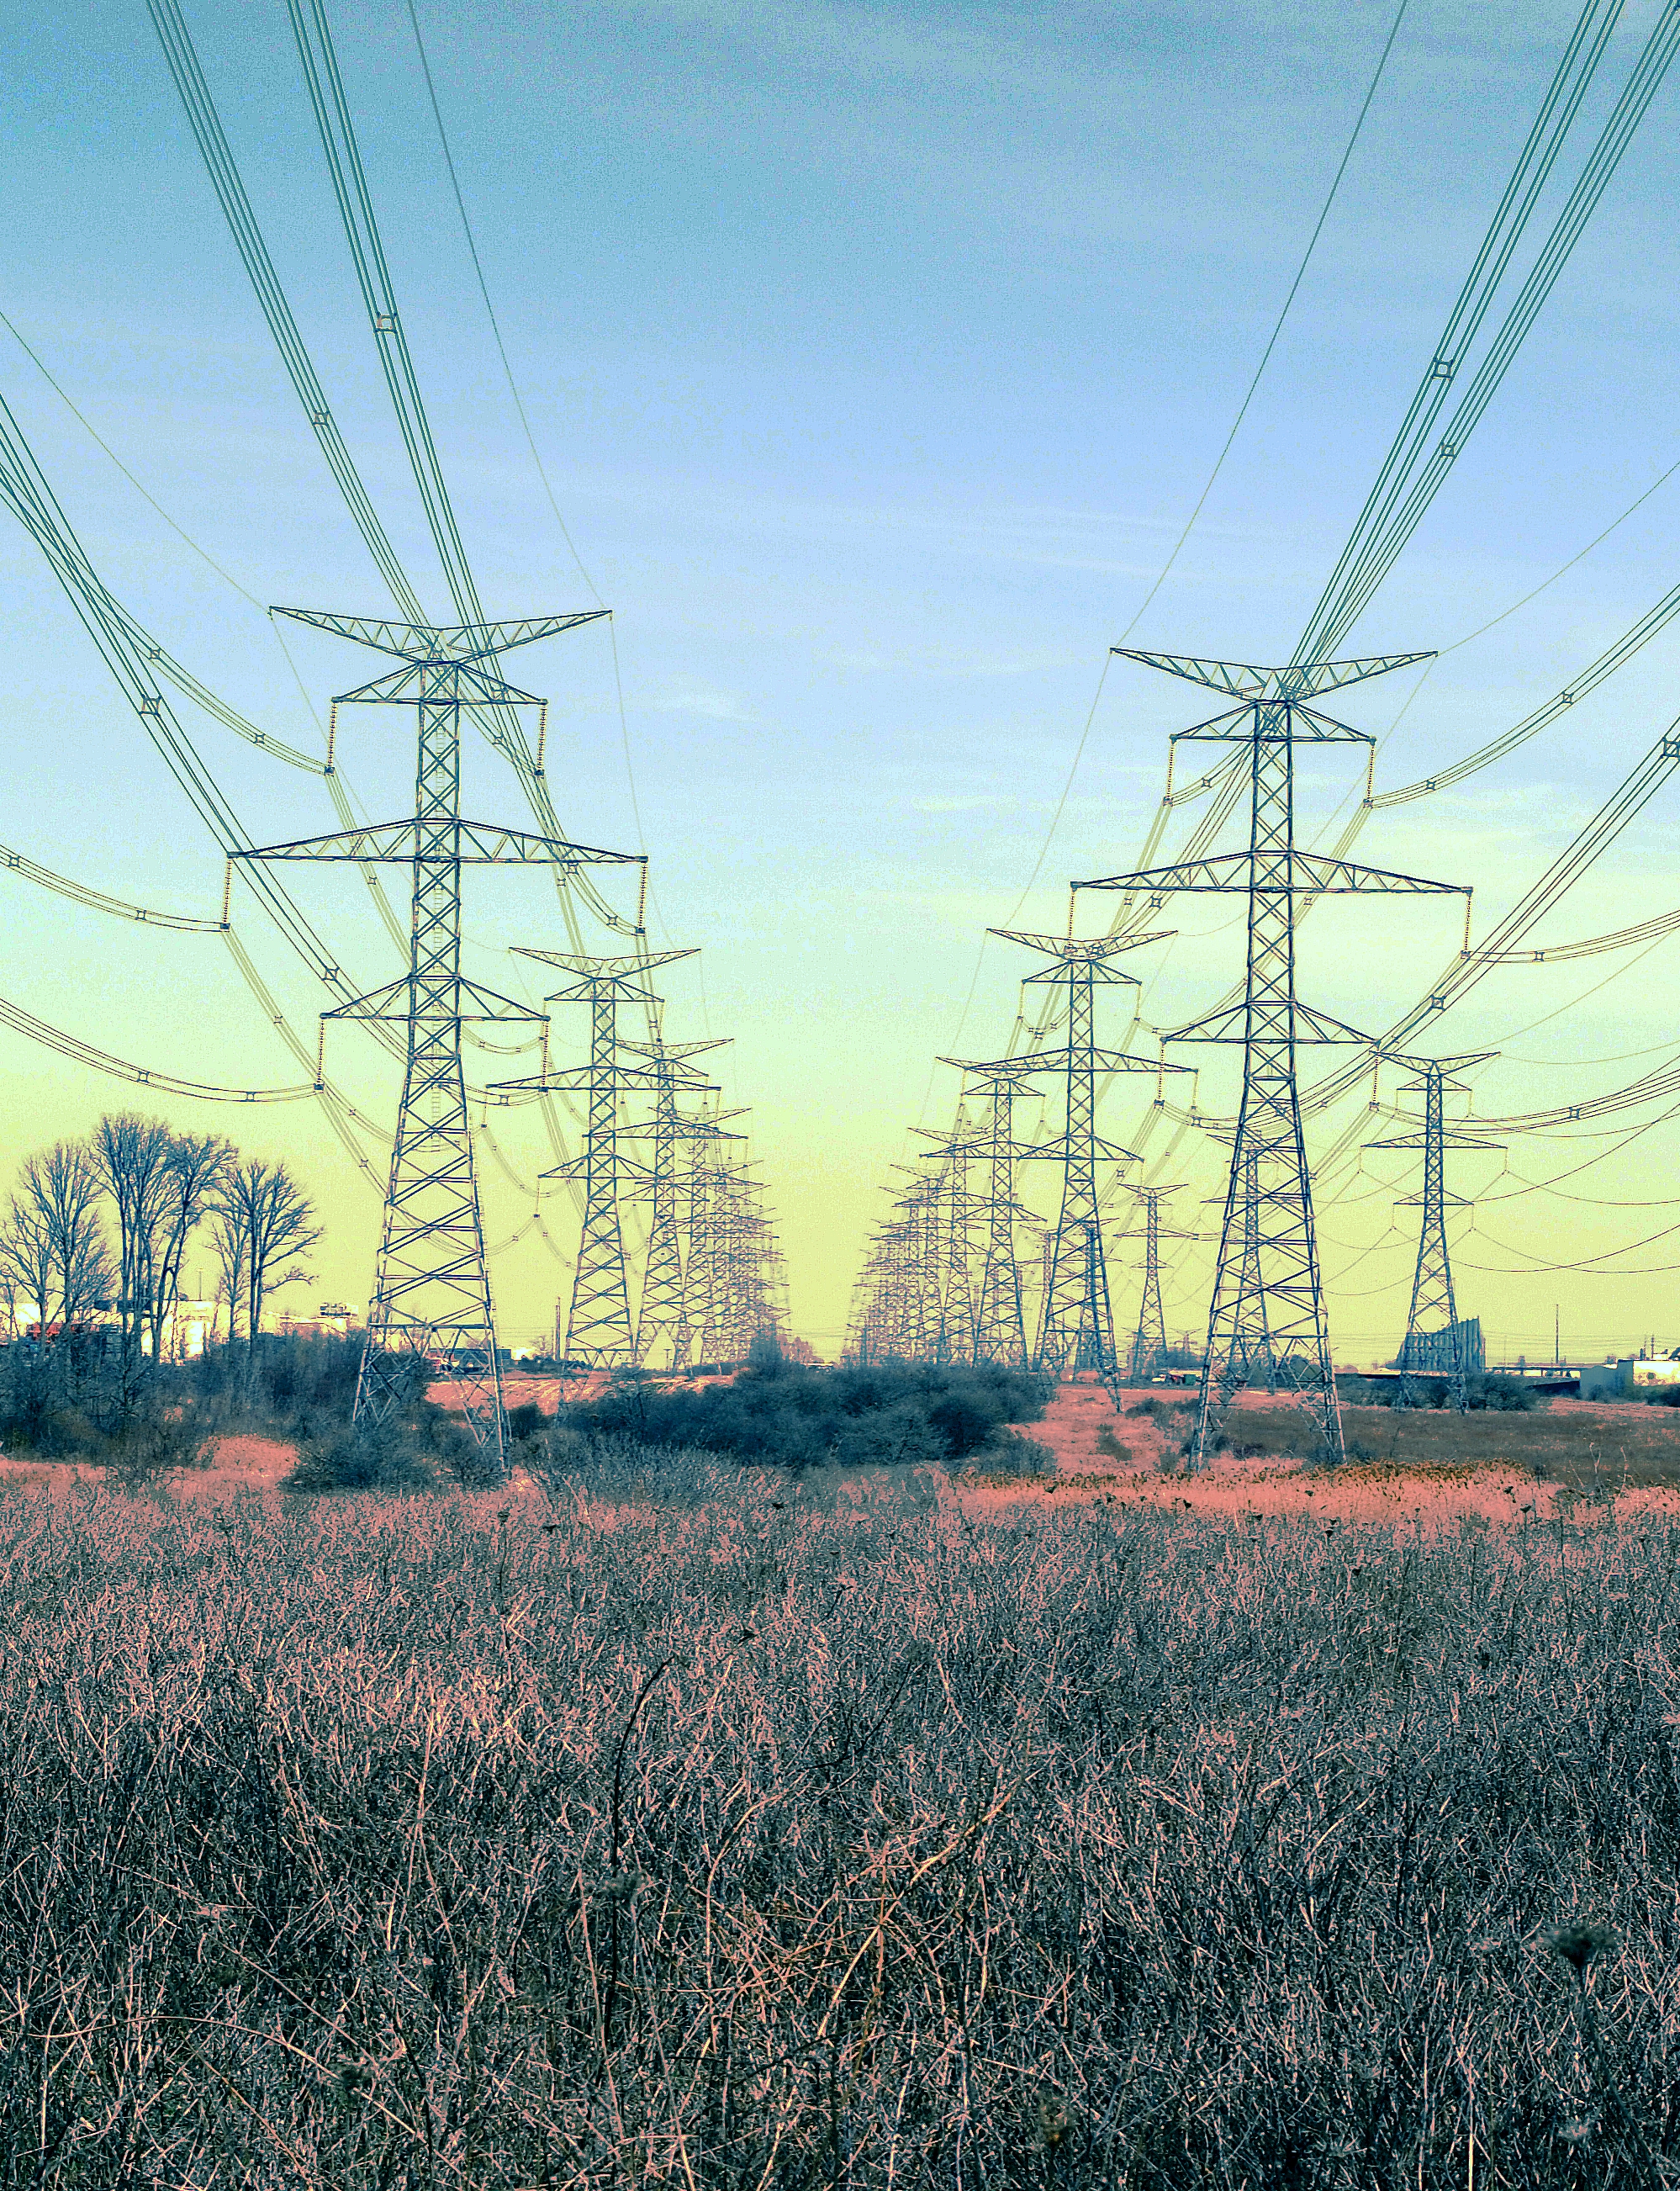 File:High voltage wires - Concord, Ontario.jpg - Wikimedia Commons